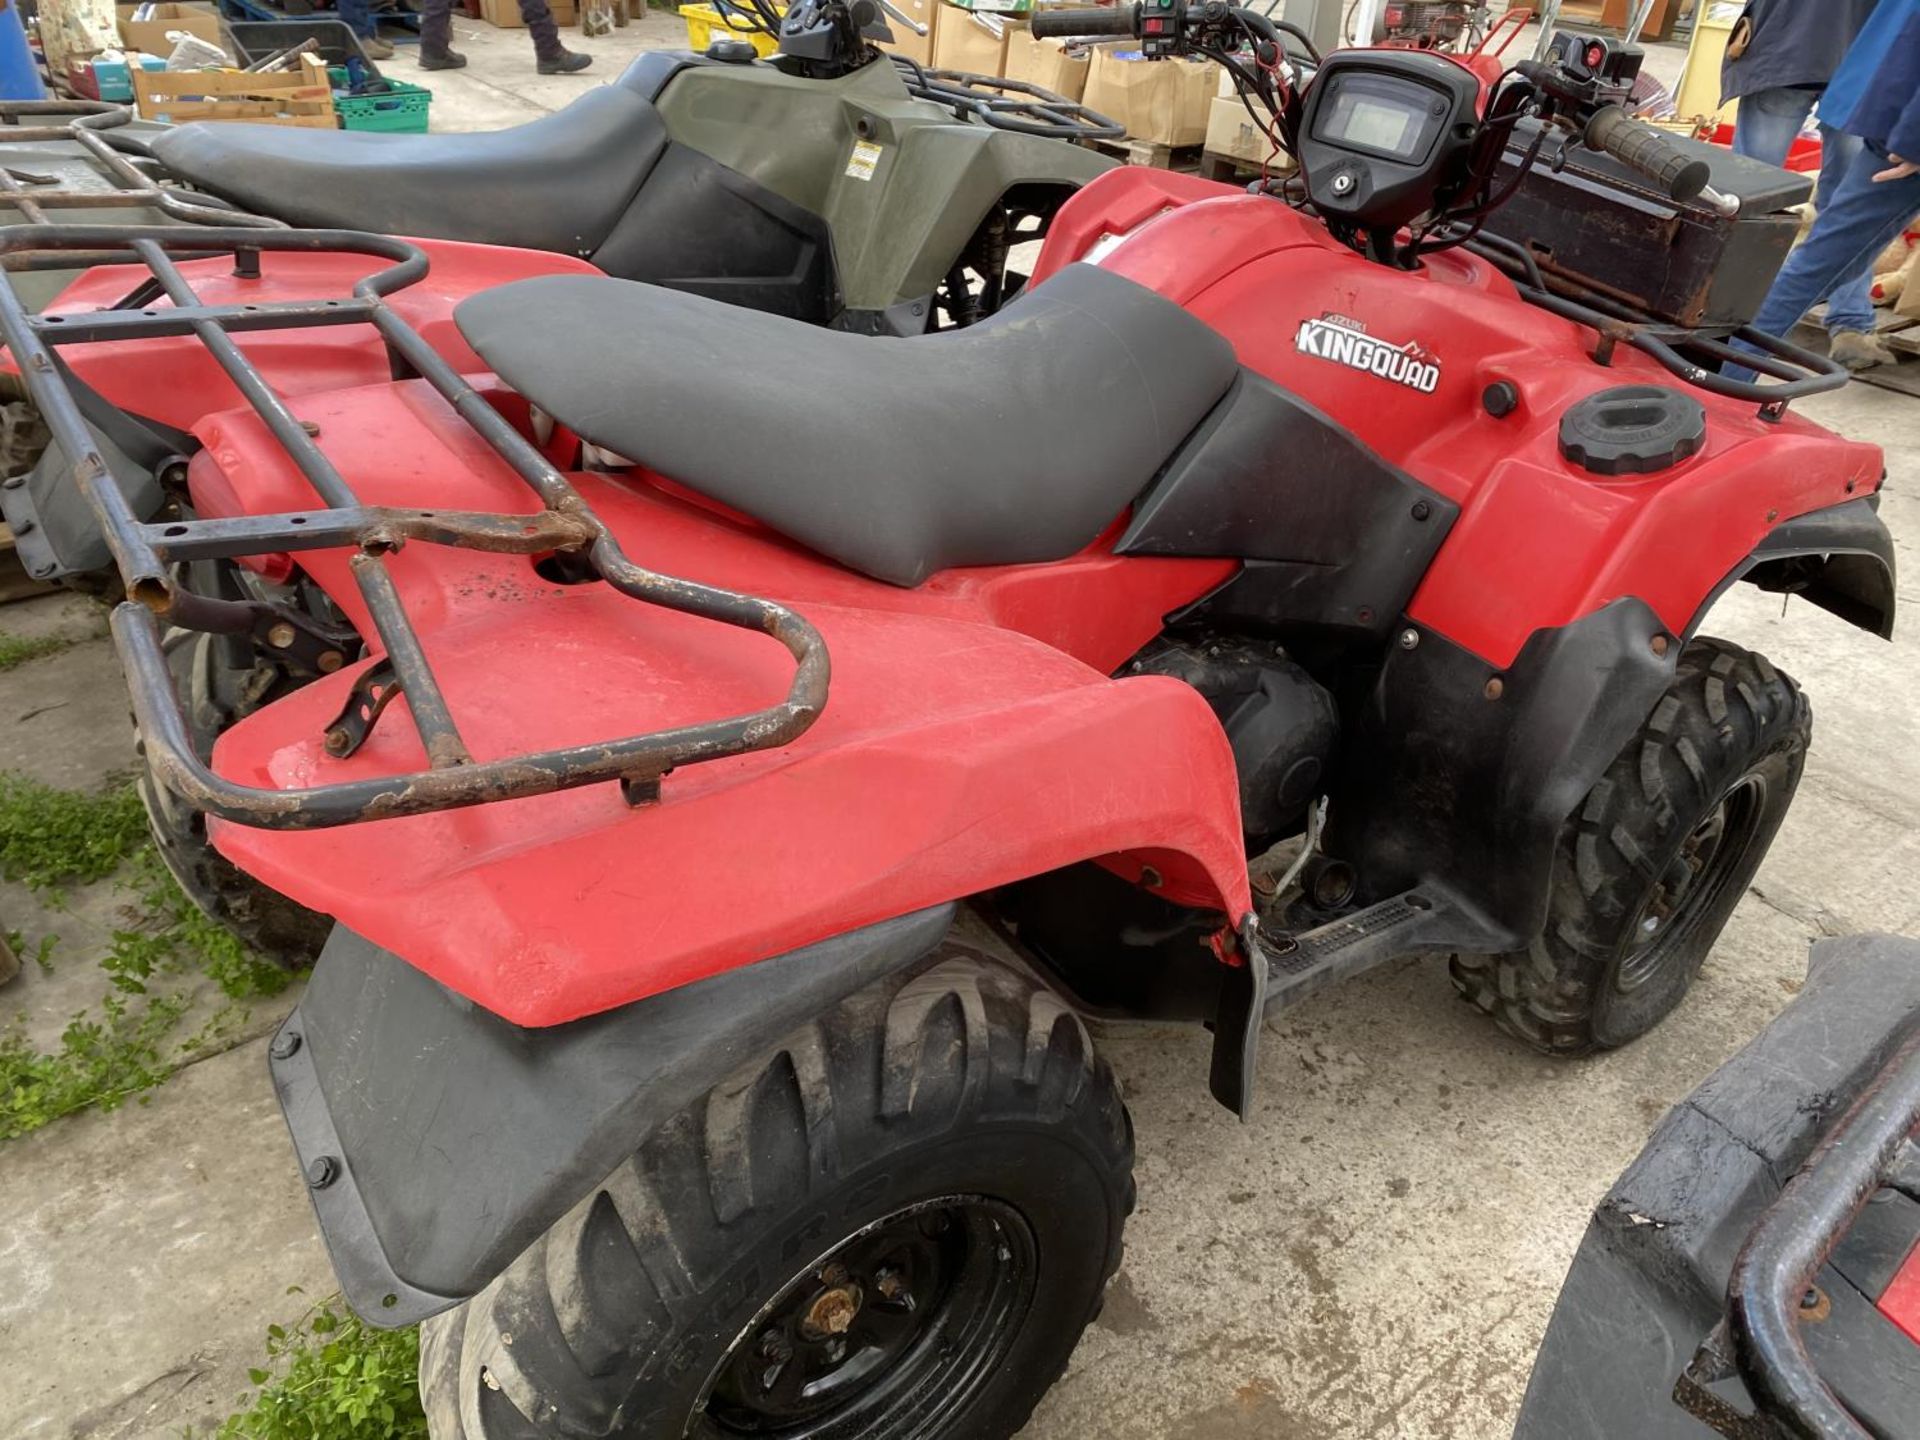 A 2014 SUZUKI KING QUAD, 500 CC WITH POWER STEERING - SEE VIDEO OF VEHICLE STARTING AND RUNNING AT - Image 2 of 3